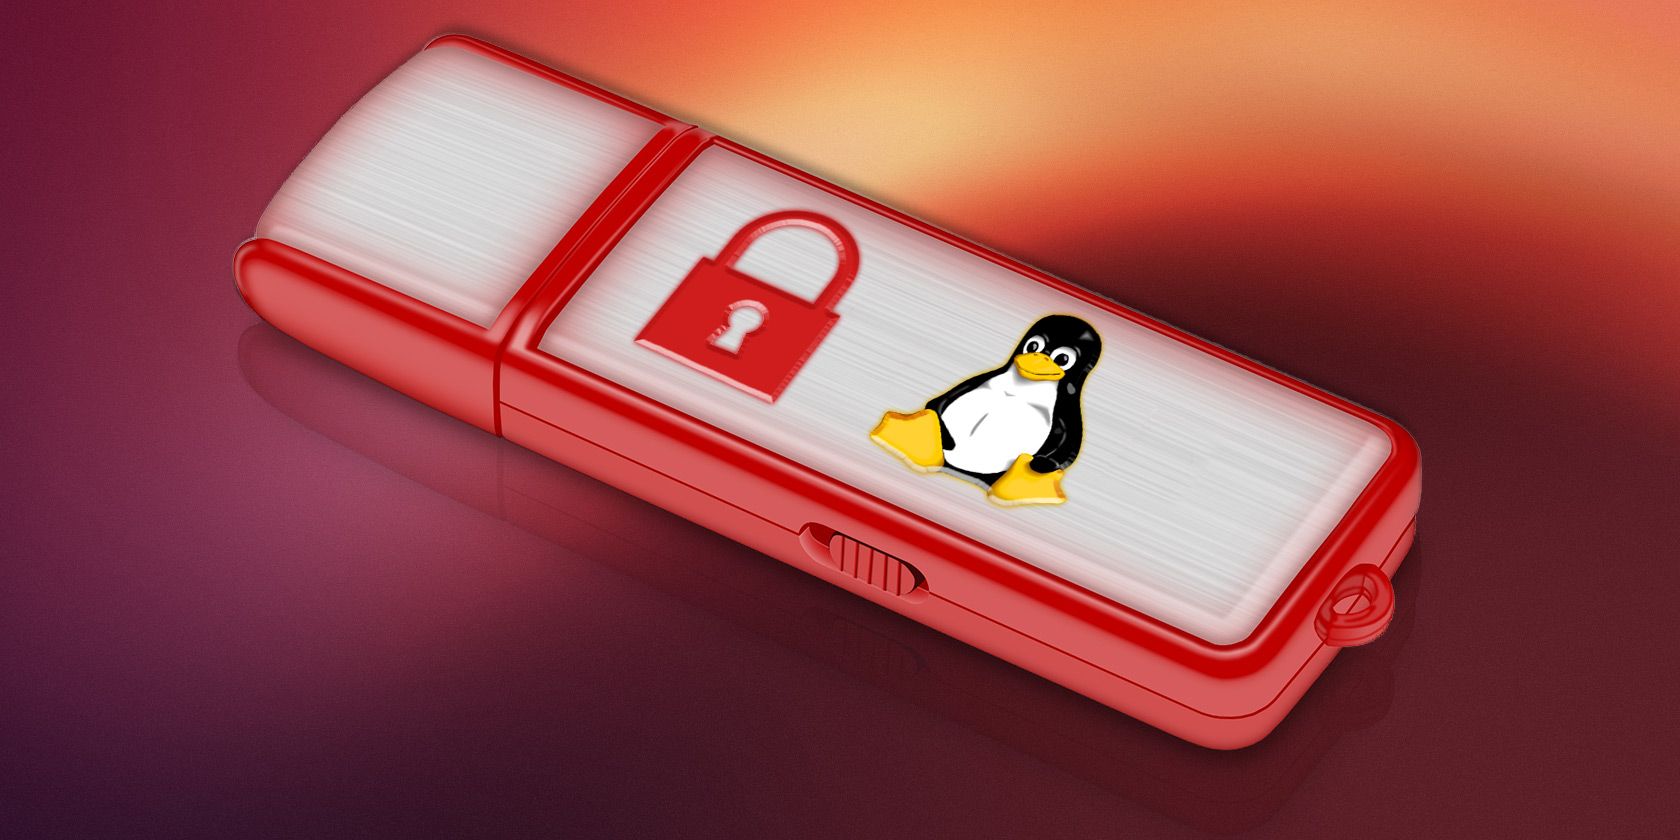 How to Create a Secure USB Drive in Ubuntu with Linux Unified Key Setup